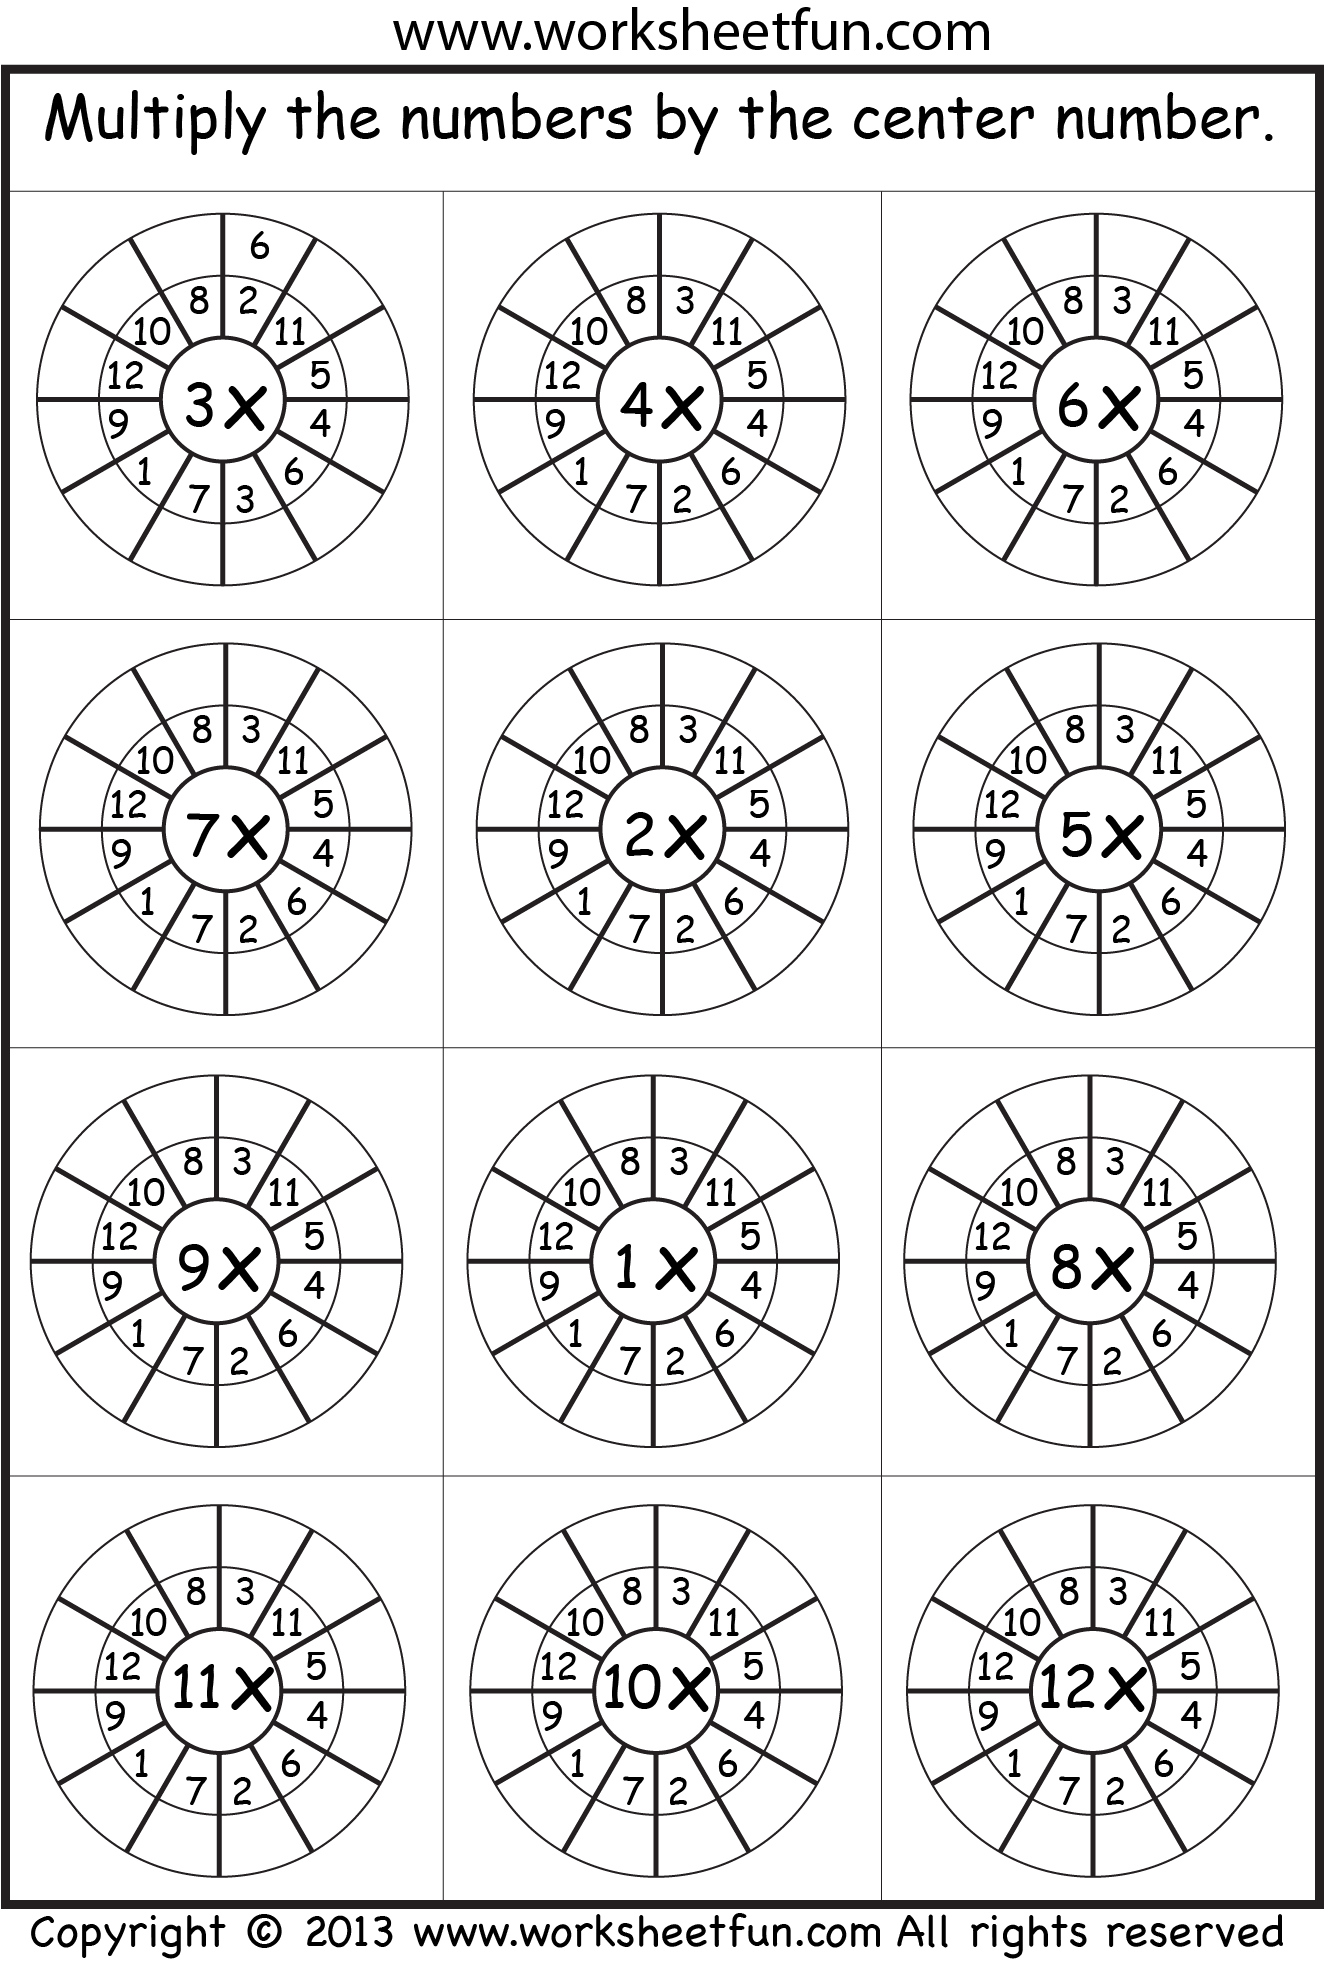 times-table-worksheets-1-2-3-4-5-6-7-8-9-10-11-12-13-14-15-16-17-18-19-and